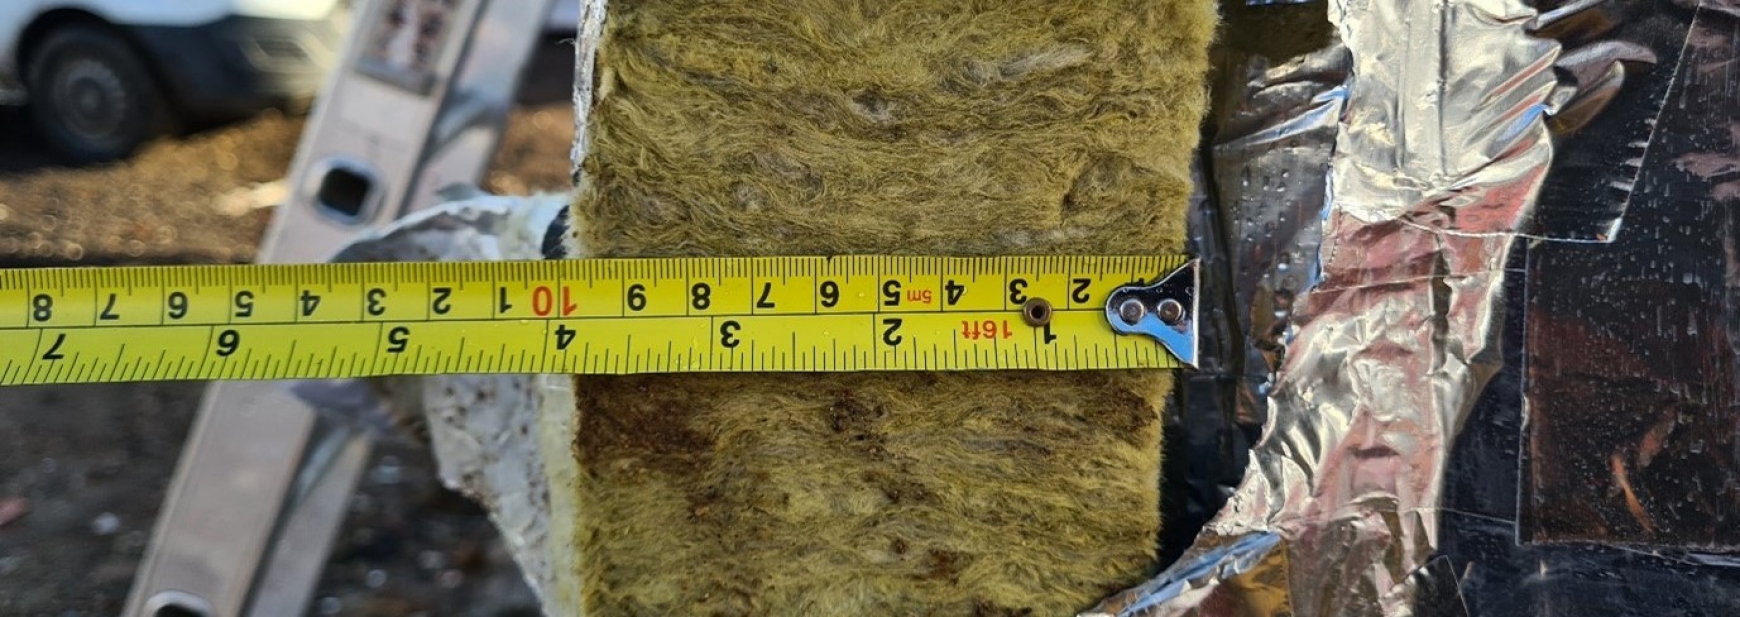 Tape measure measuring the thickness of insulation